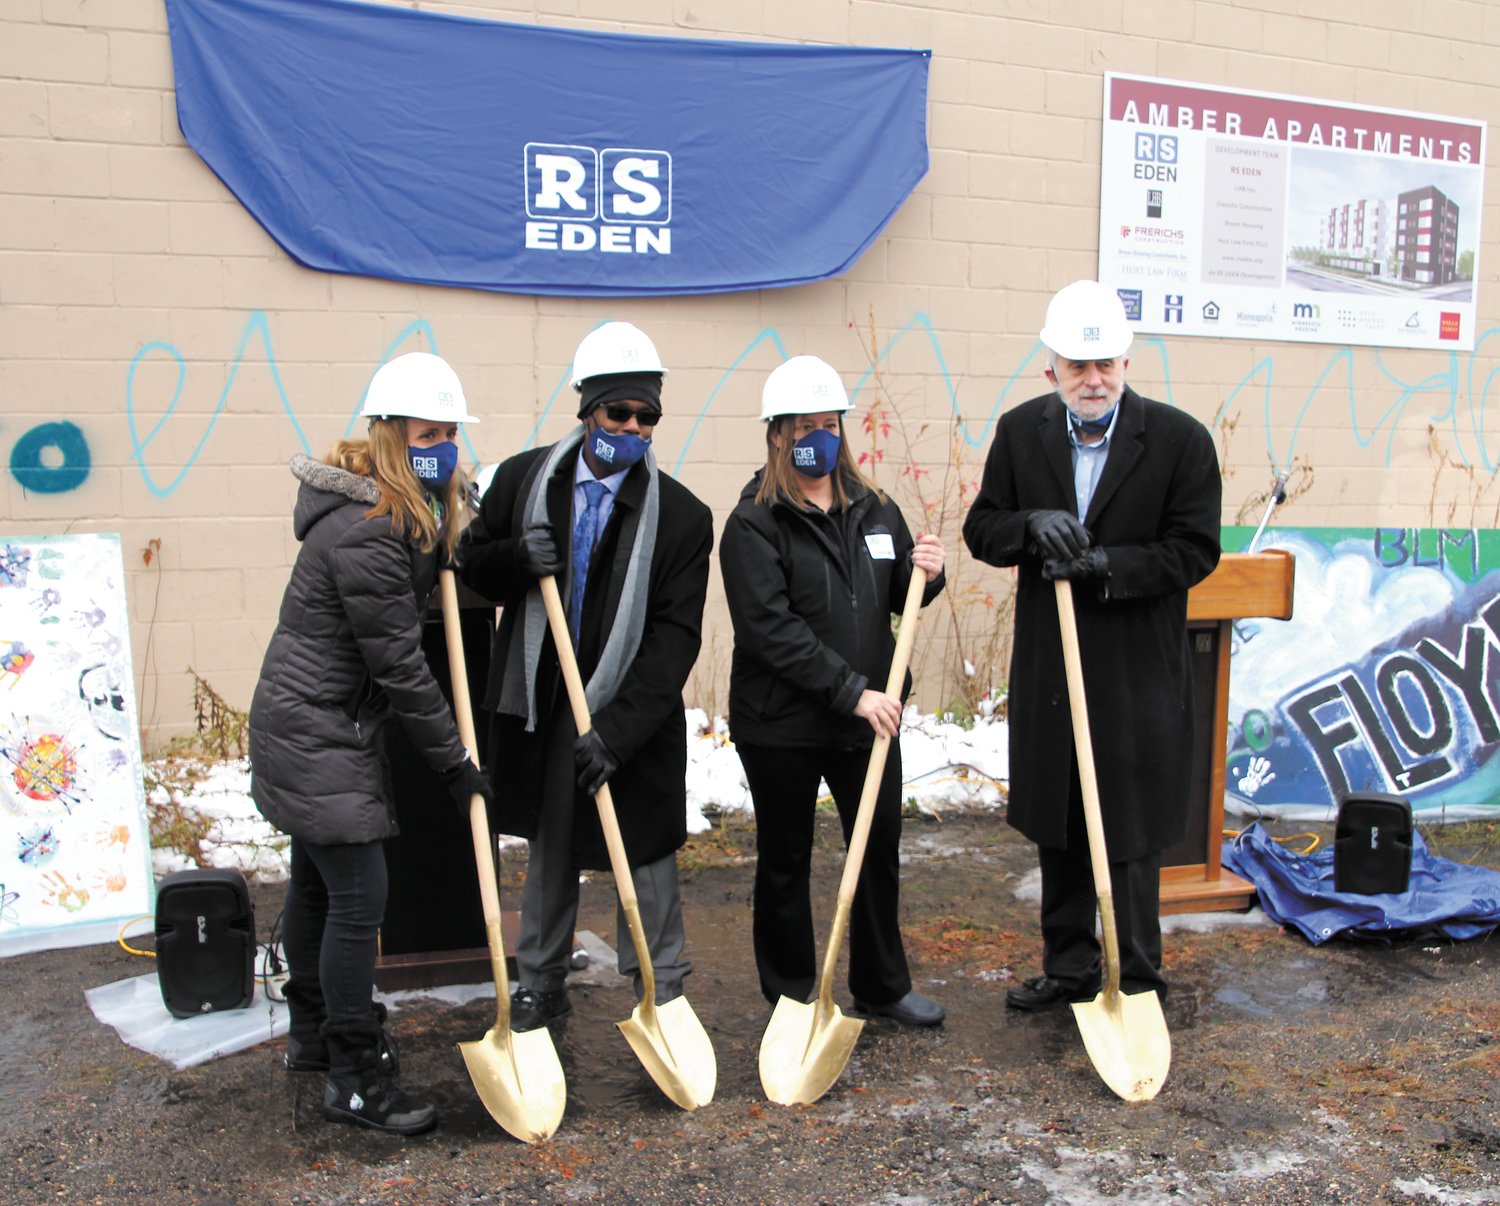 Folks break ground for the five-story, 52,178-square-foot Amber Apartments on Wednesday, Oct. 21, 2020. Left to right are RS Eden President and CEO Caroline Hood, former RS Eden client Cletus Robinson, building namesake Amber Cain, and former RS Eden President Dan Cain. The 80-unit building on the one-acre site just north of Walgreens along Hiawatha will replace the Bell Laboratory building. There will be a 25-space parking lot and inside storage for bicycles. One third of the property will be green space along what planner hope will soon be the Minn Hi Line linear park. (Photo by Tesha M. Christensen)